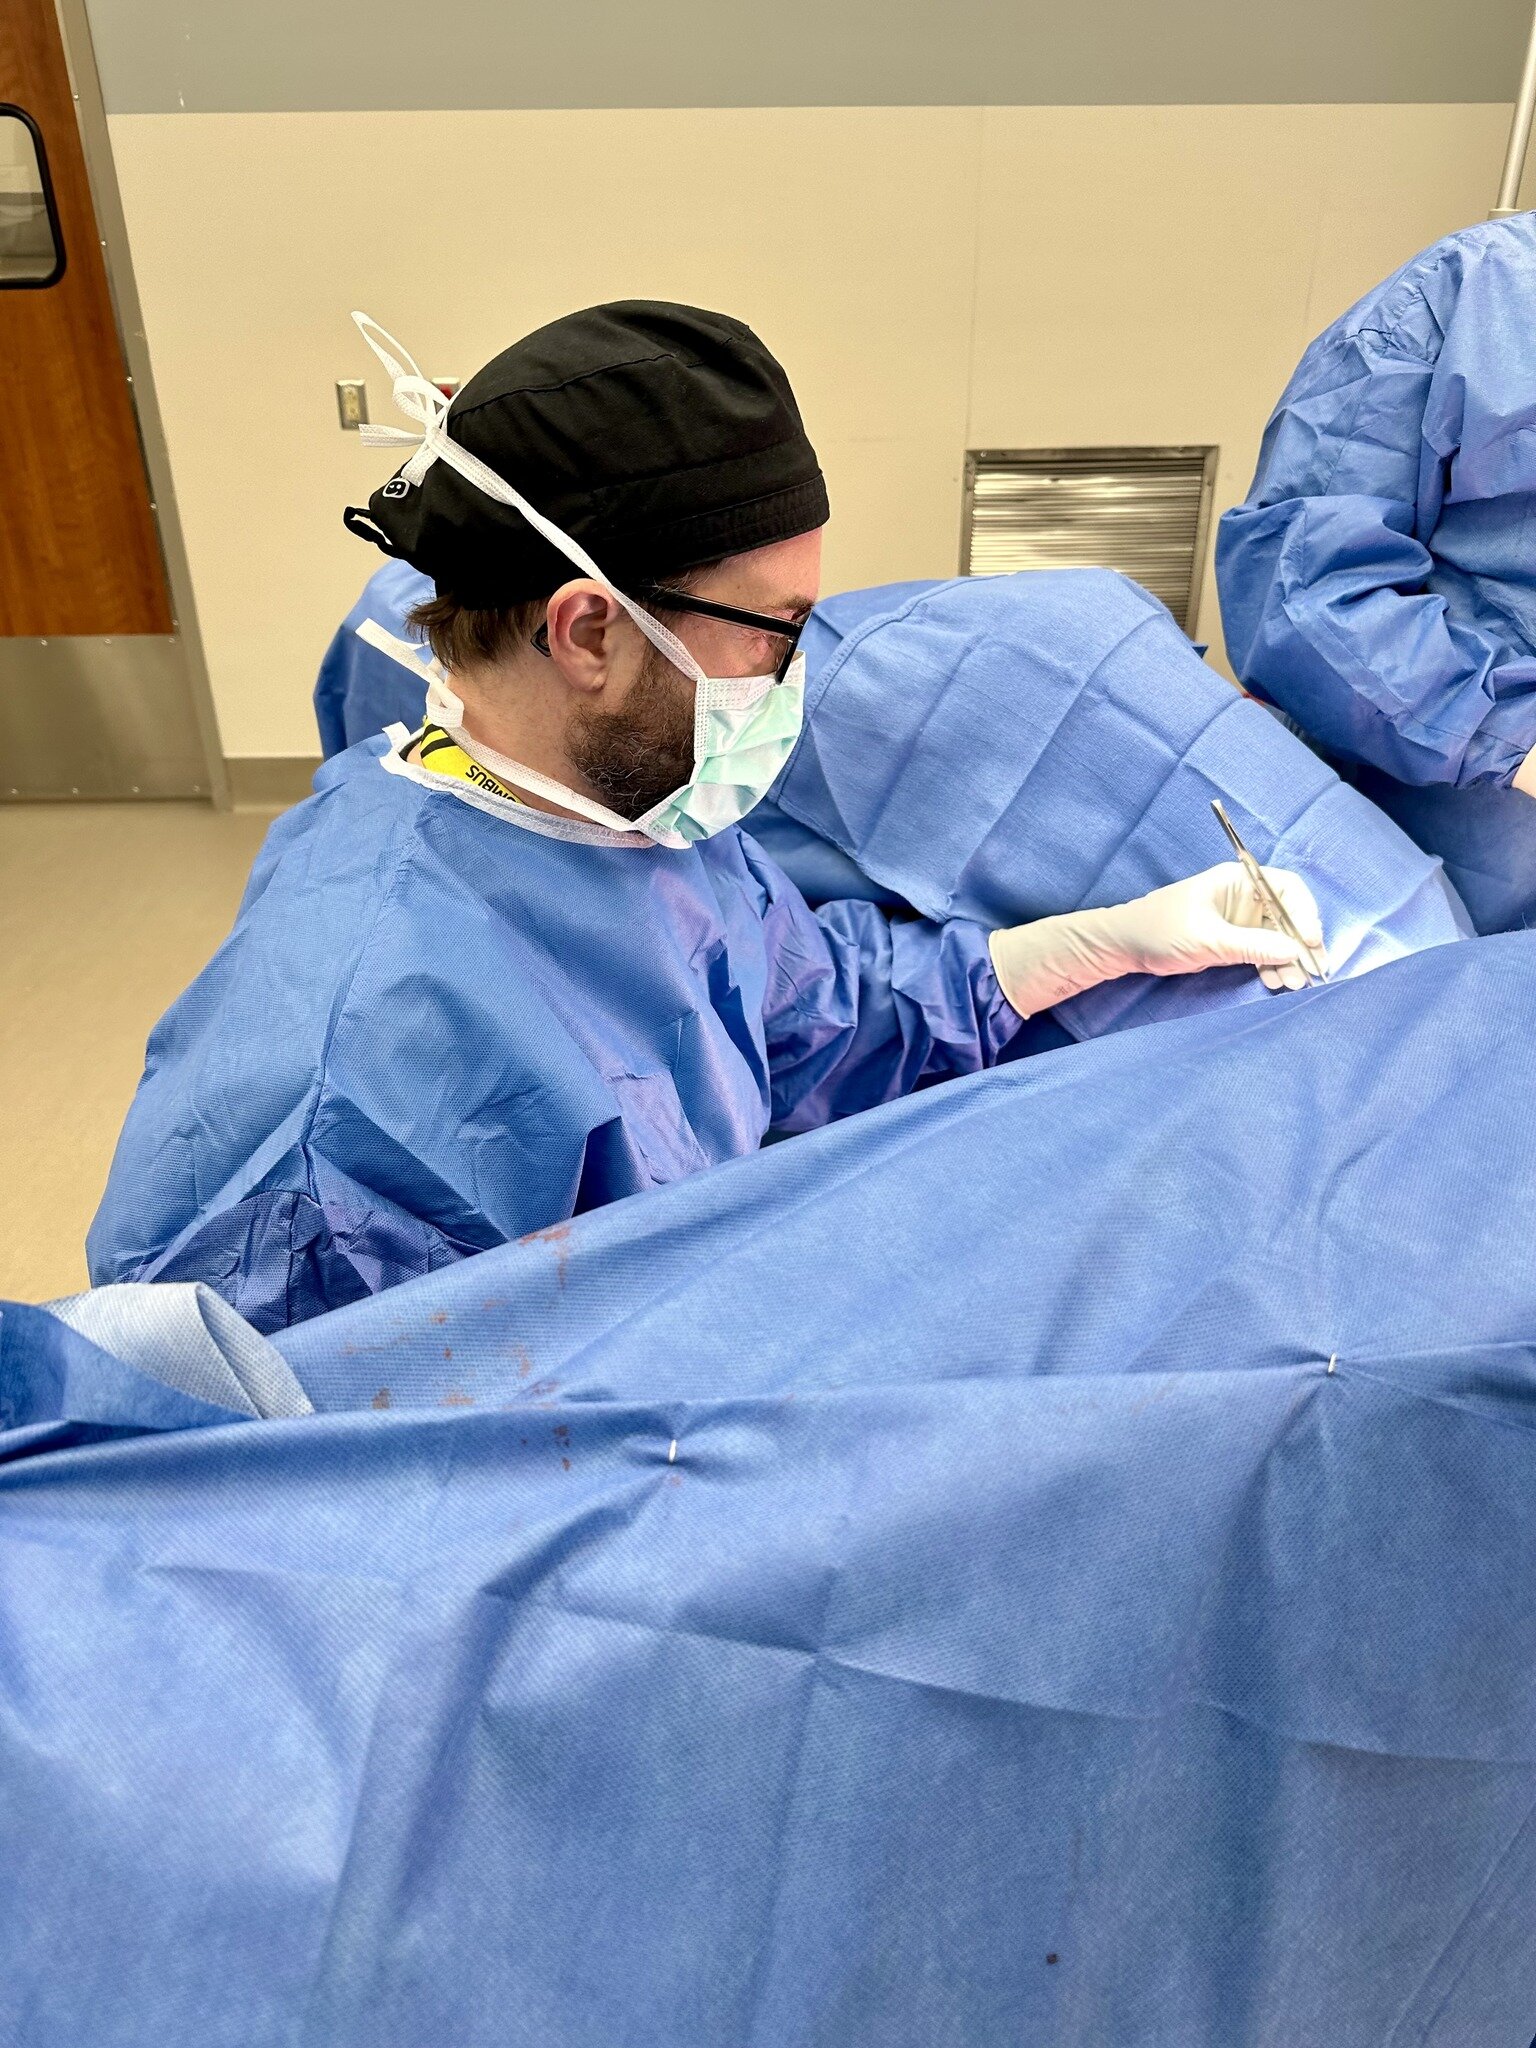 Dr. McClung and Michael were hard at work this week in the operating room.  We have a waitlist of patients waiting for surgery that extends well into the 2nd half of 2024.  We're so grateful for patients who patiently wait their turn and bring their 